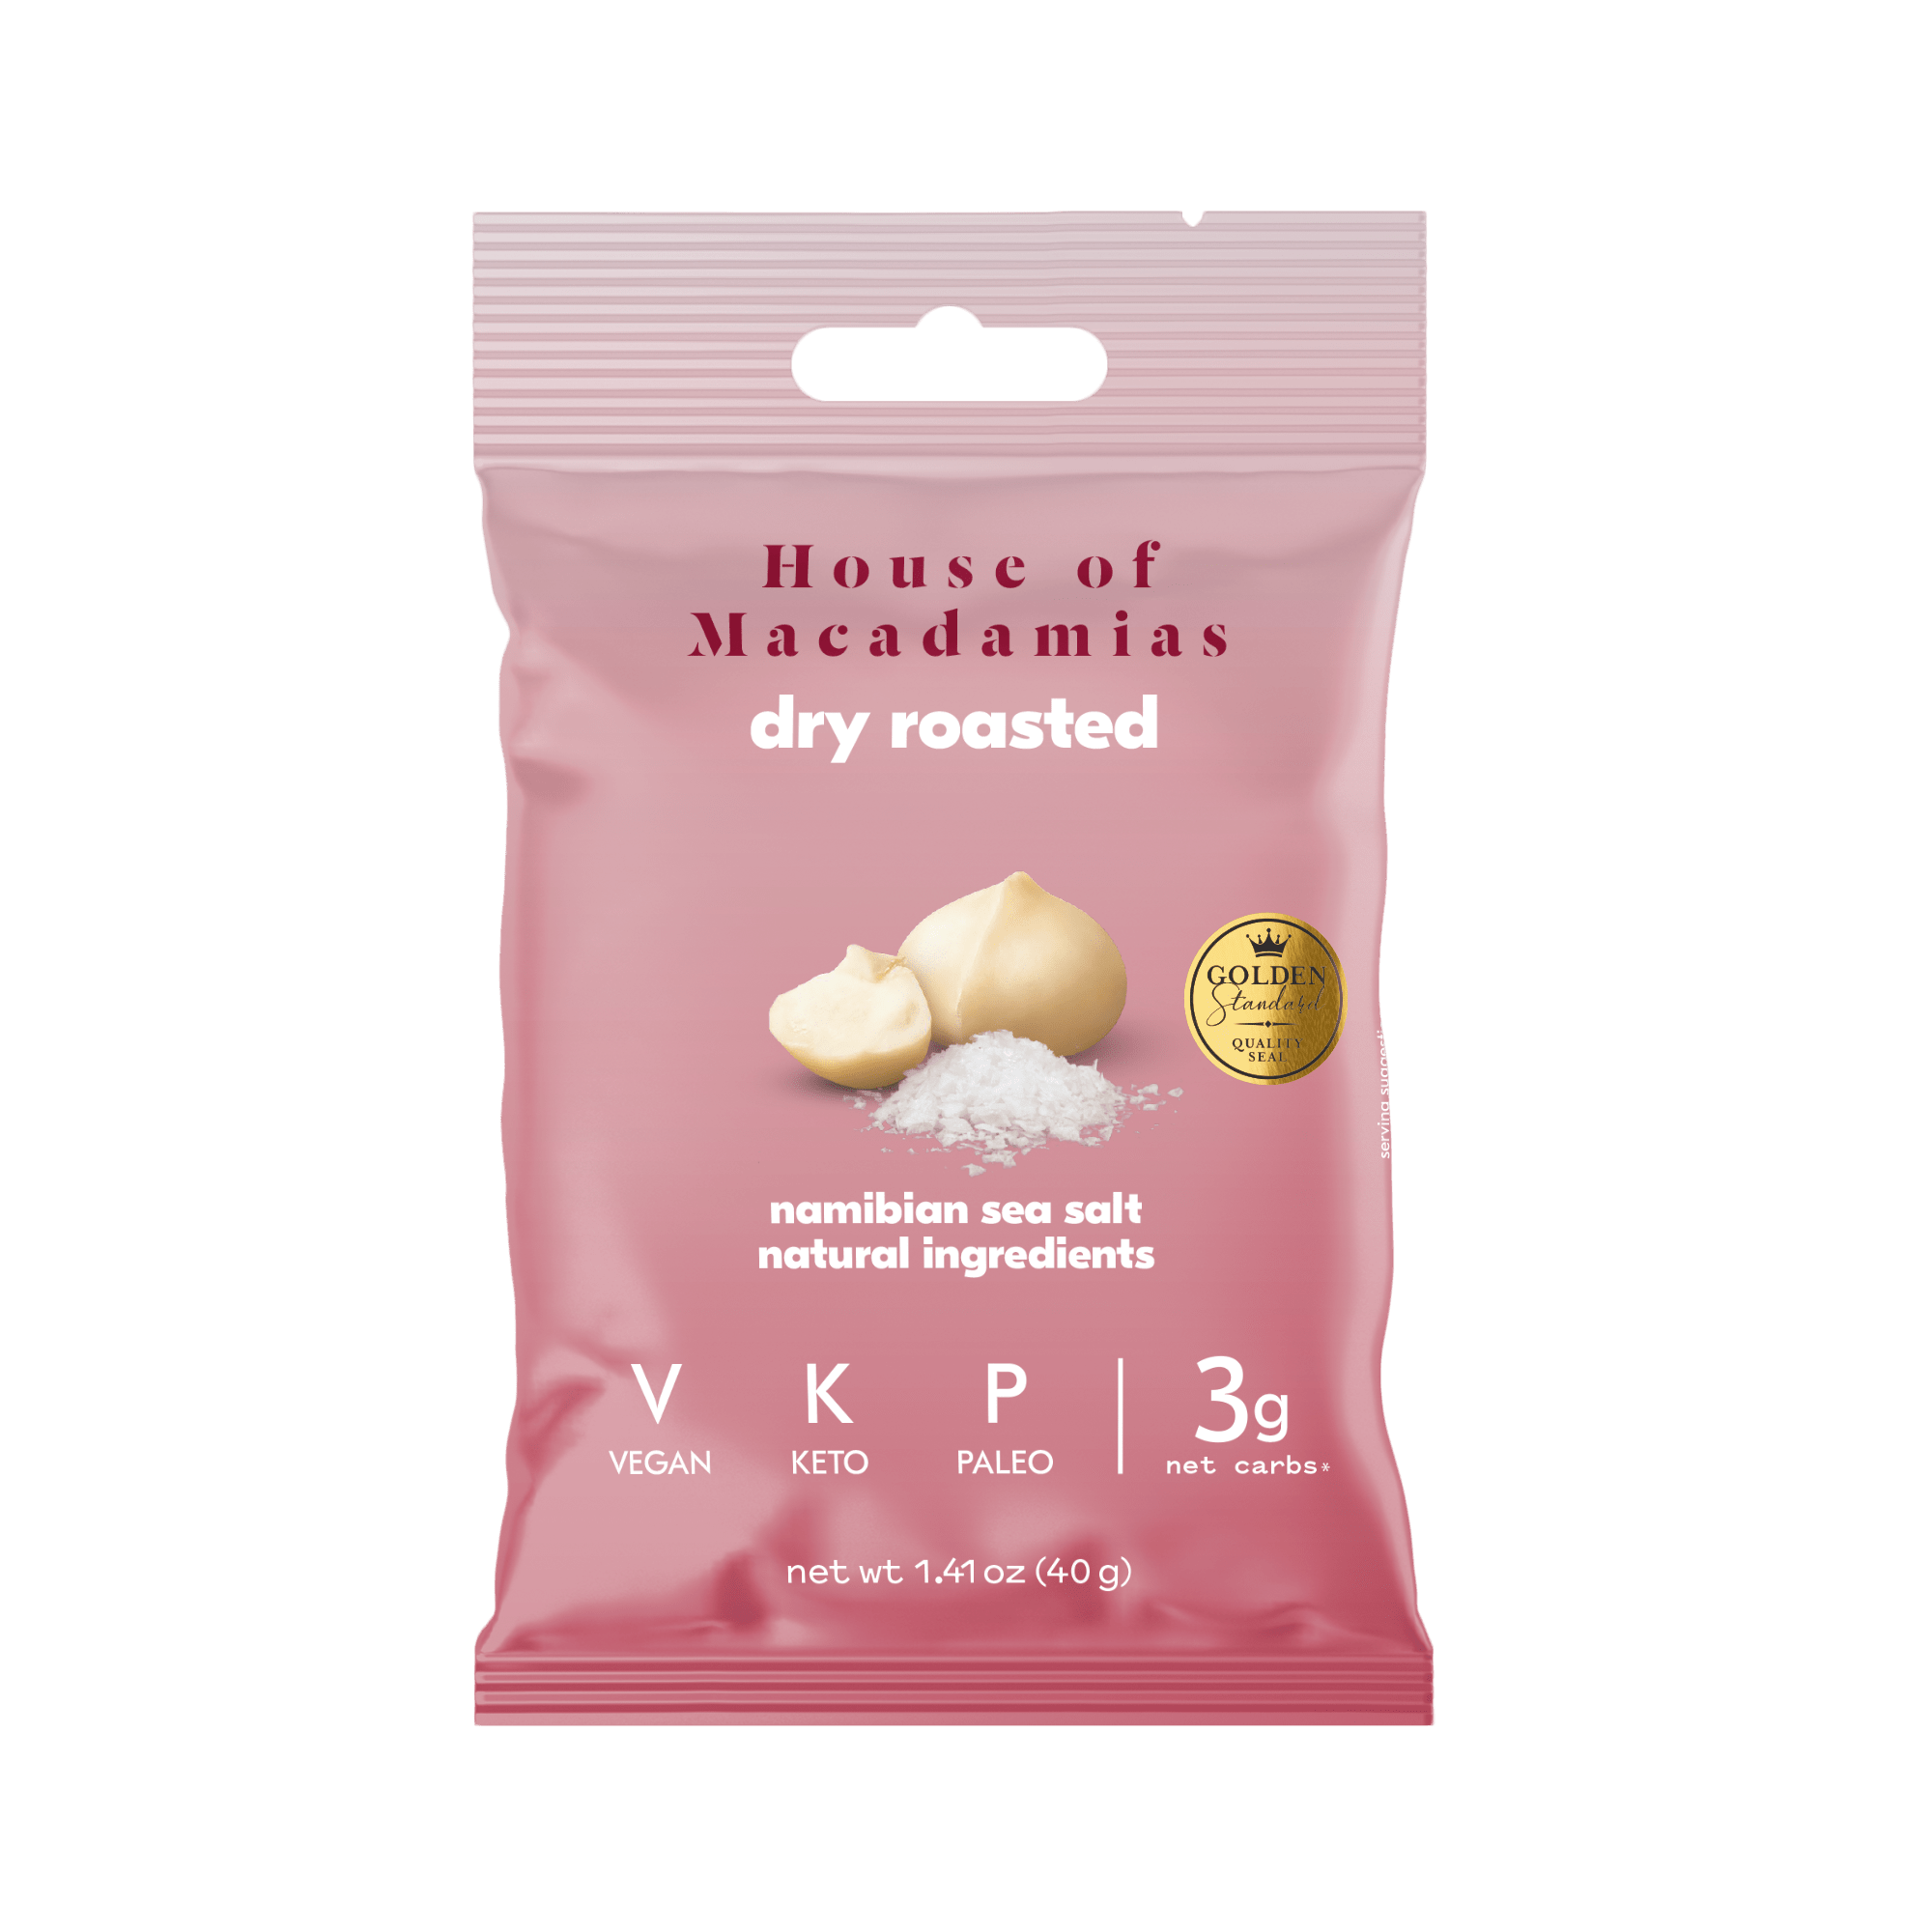 Macadamia Dry Roasted Nuts Variety Pack (3 Flavors, 12 Bags)